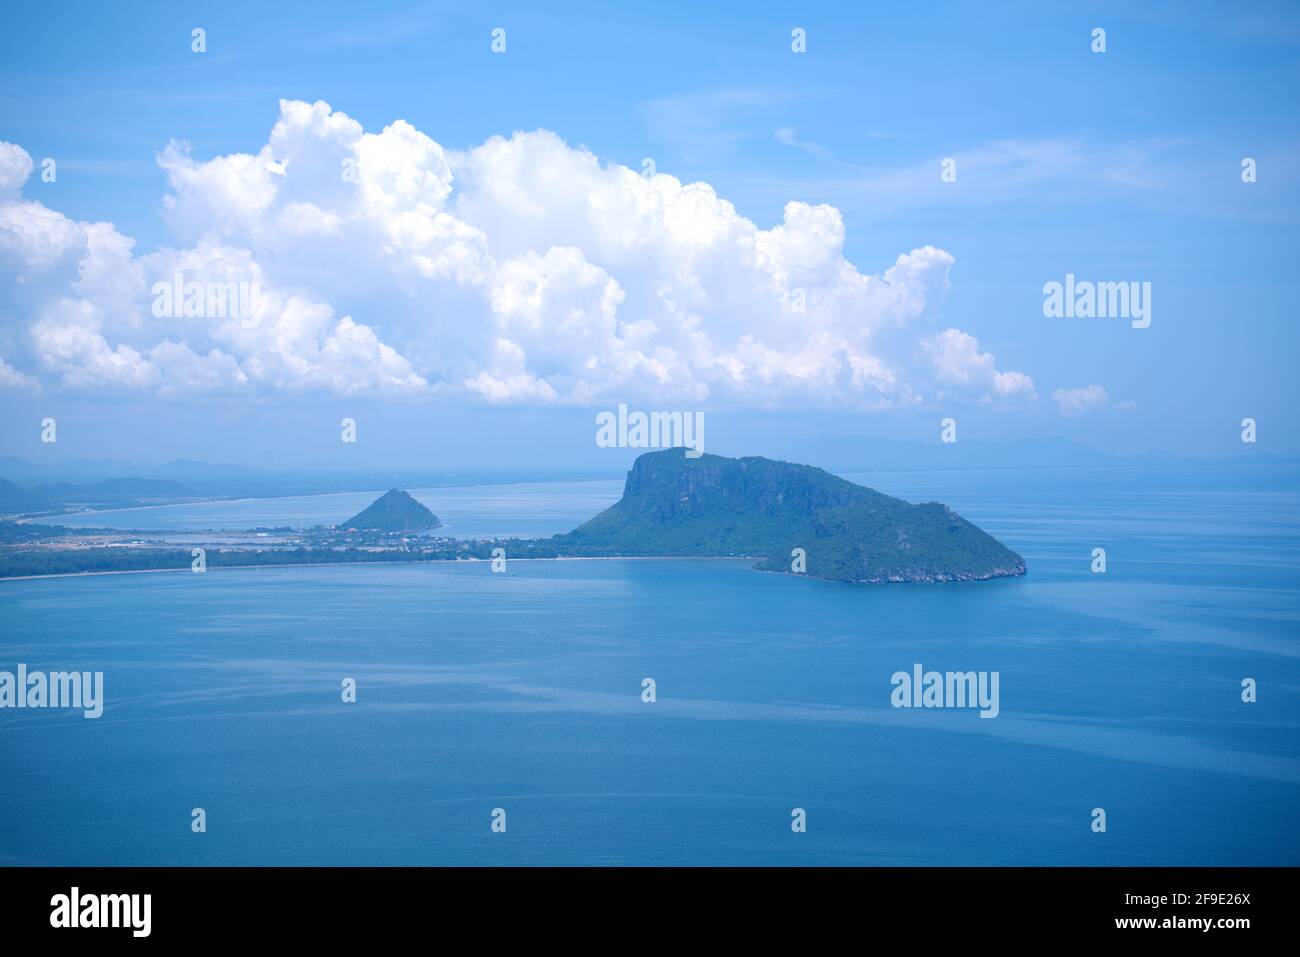 The Famous viewpoint at Kao Lom Muak mountain aerial view of Ao Manao bay and Ao Manao beach. Prachuap Khiri Khan, Thailand in 14th October 2019. Stock Photo